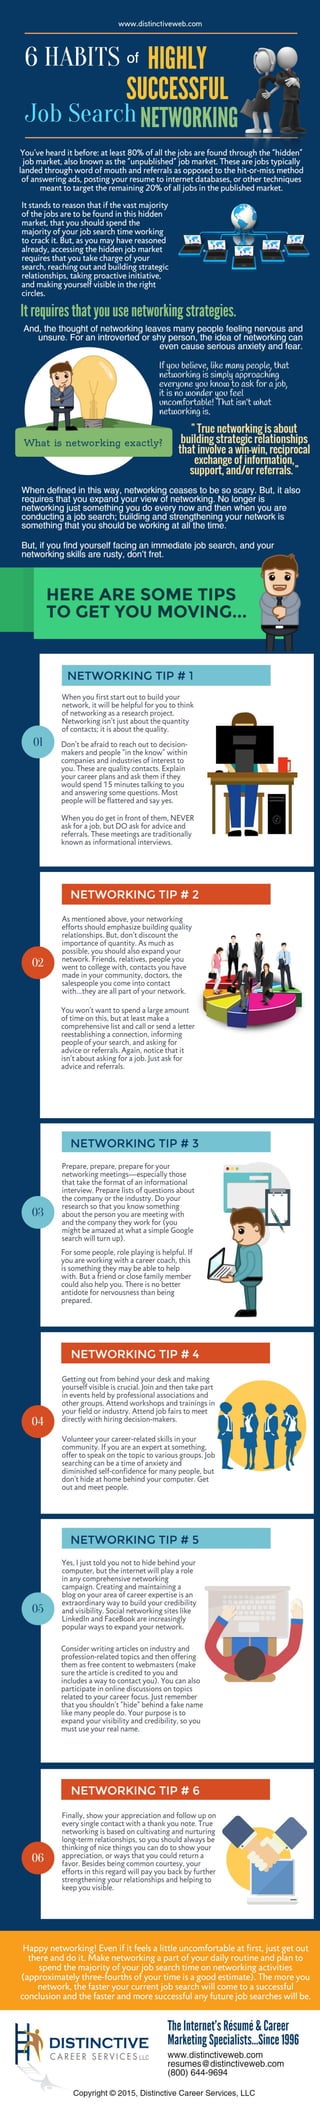 6 Habits of Highly Successful Job Search Networking